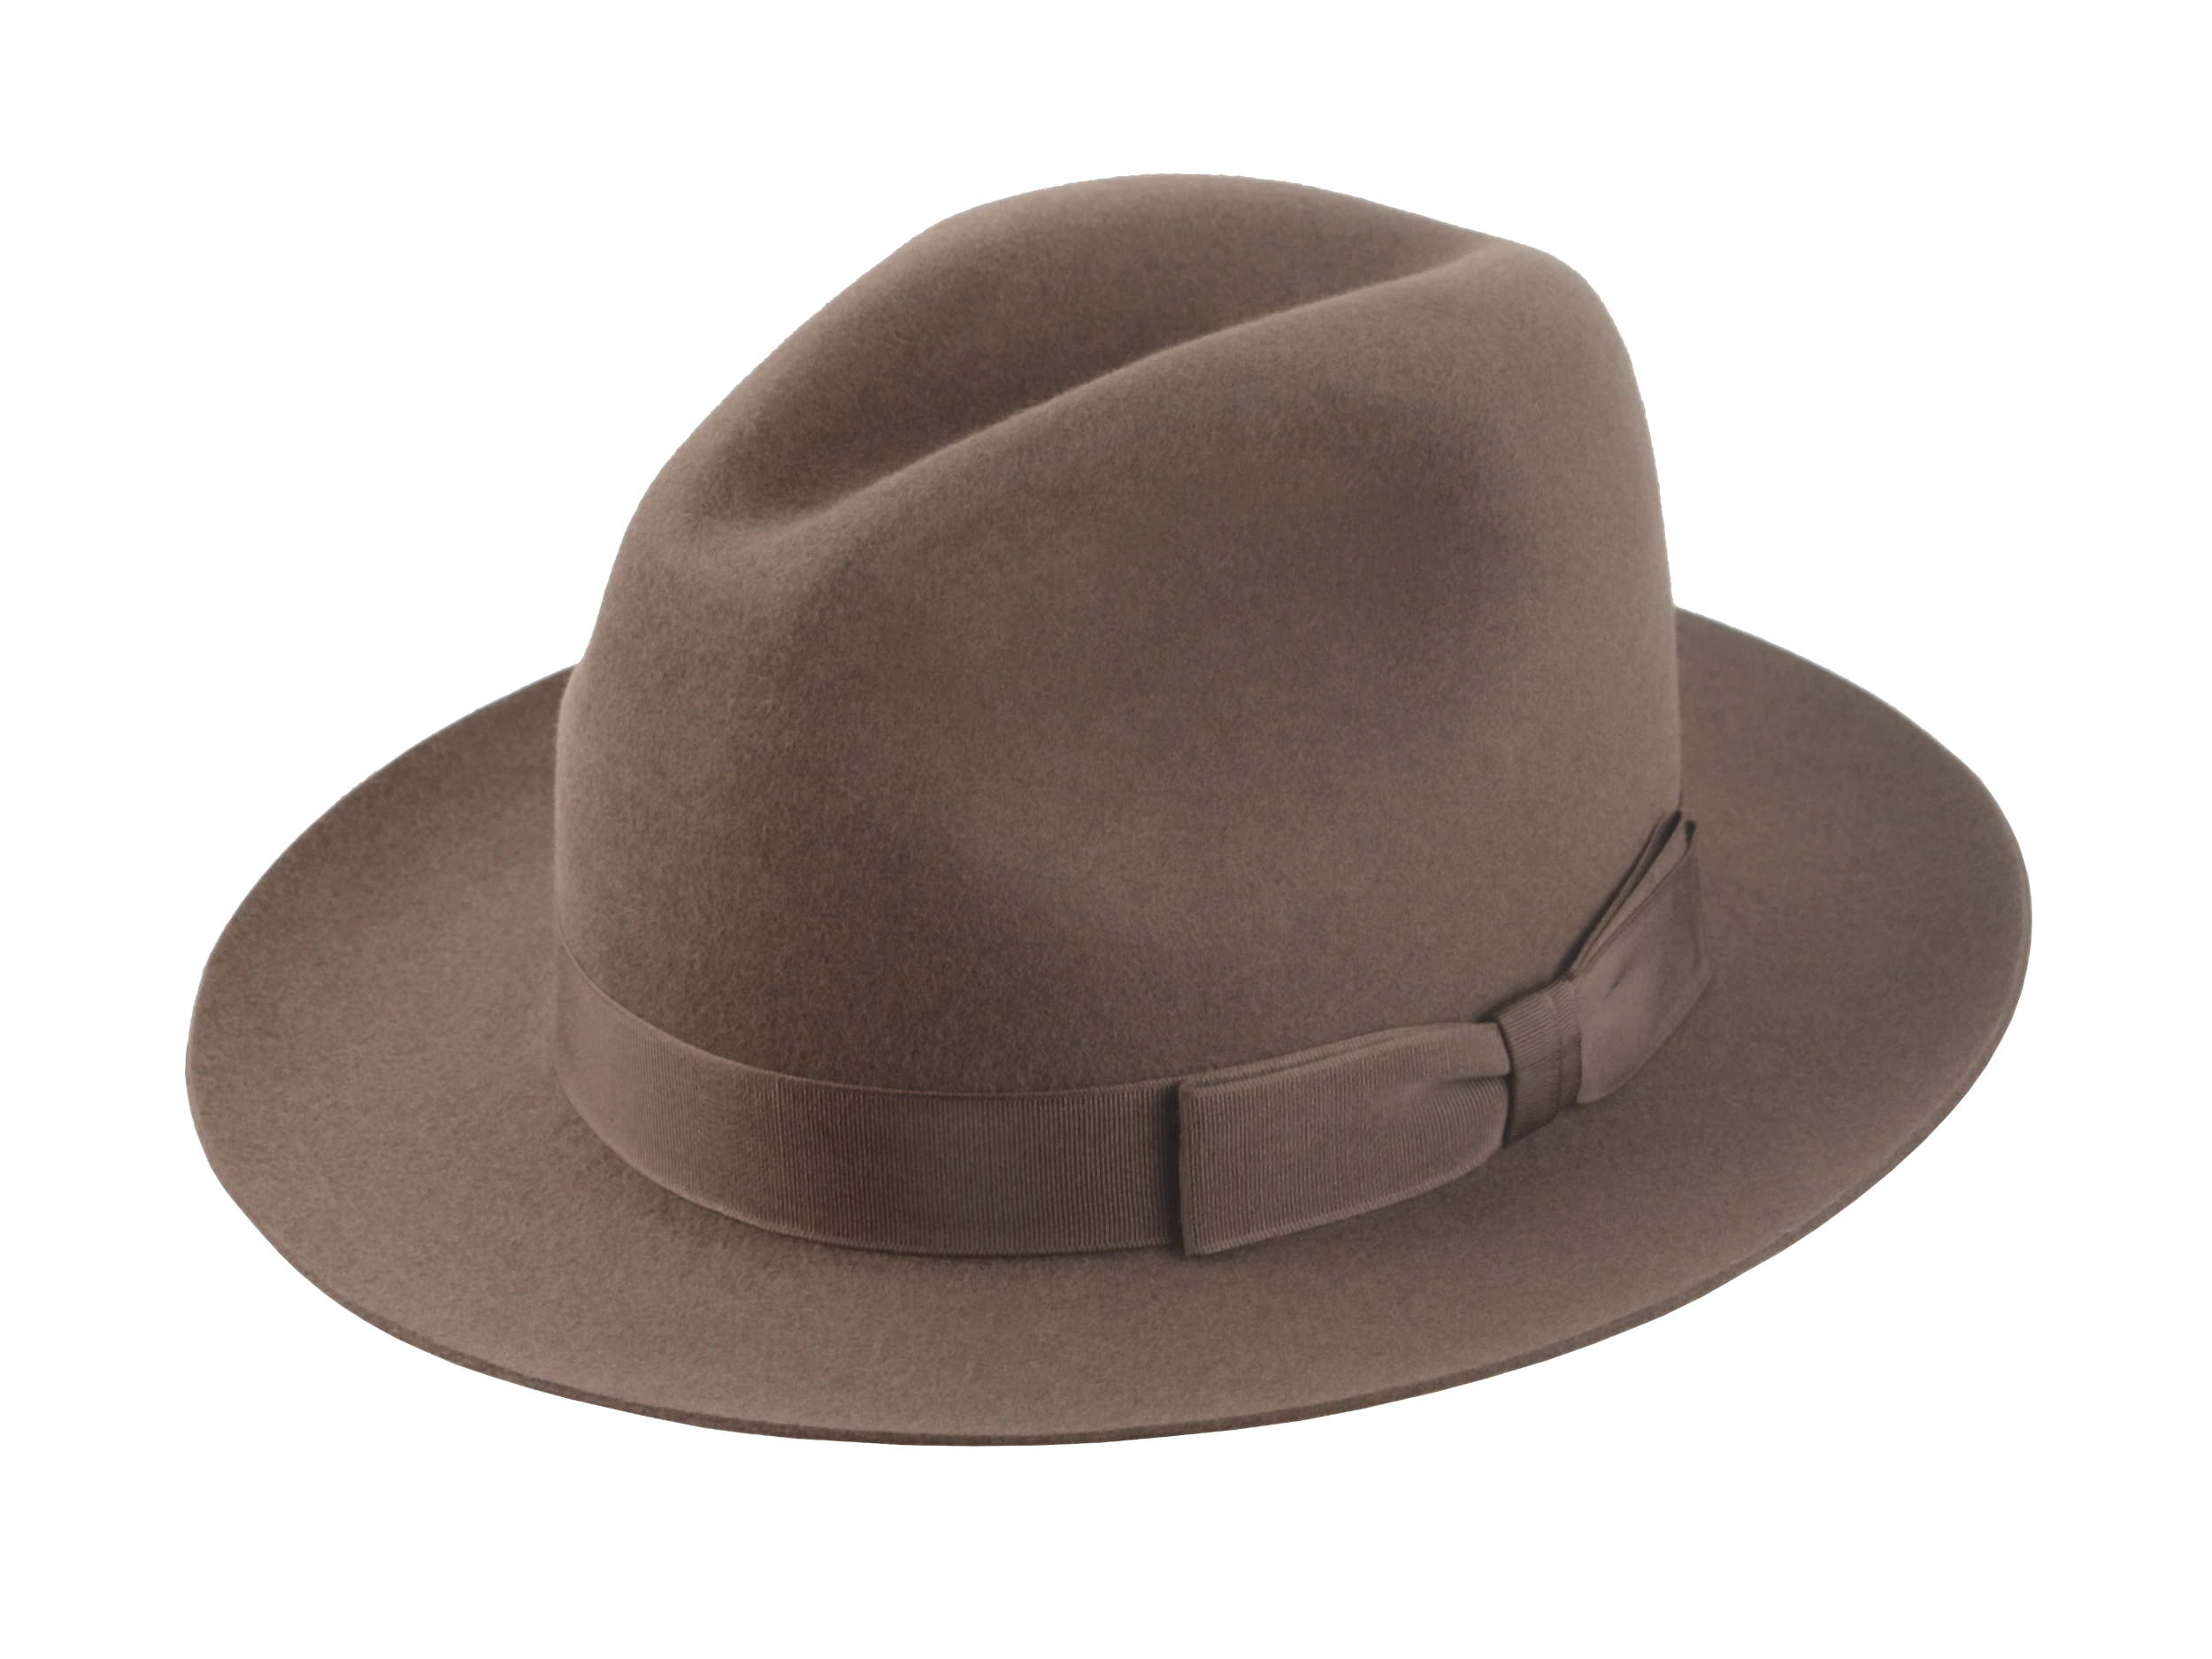 The Fortis: Front view displaying the Fedora's balanced proportions and artisanal craftsmanship | Agnoulita Hats